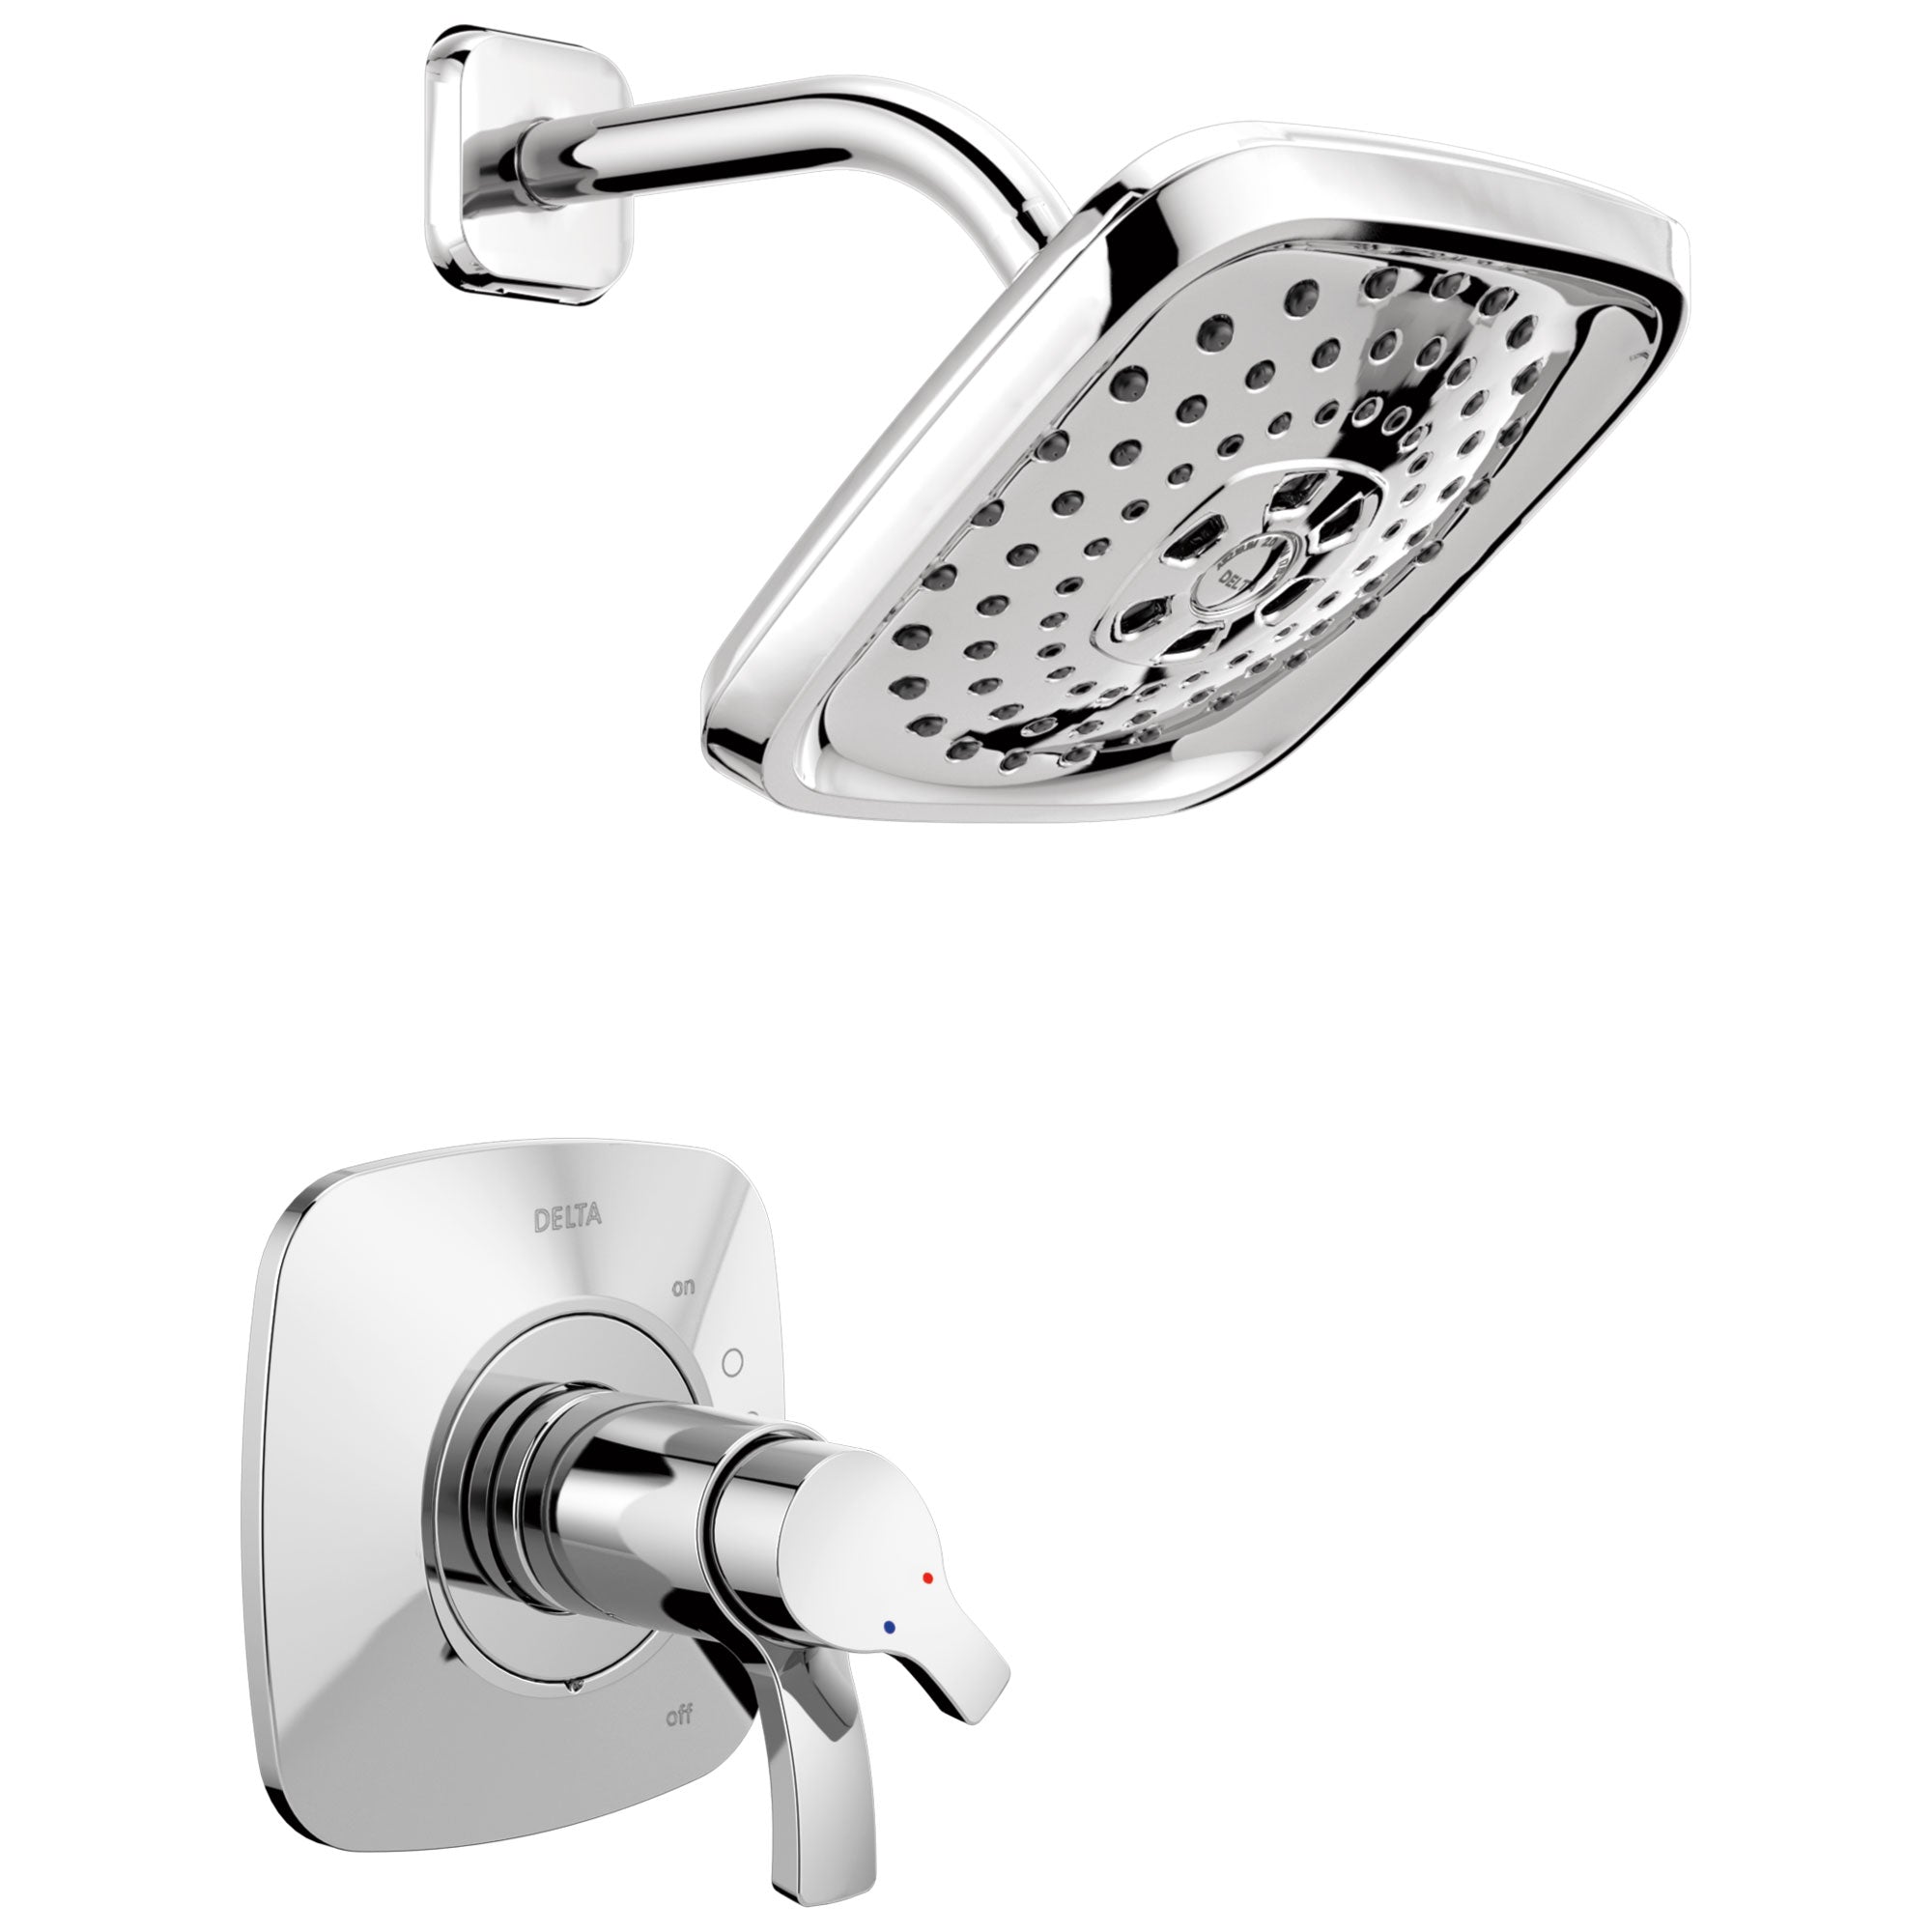 Delta Tesla Collection Chrome TempAssure 17T Series Modern Dual Temp and Pressure Control Shower Faucet Includes Rough-in Valve with Stops D1941V